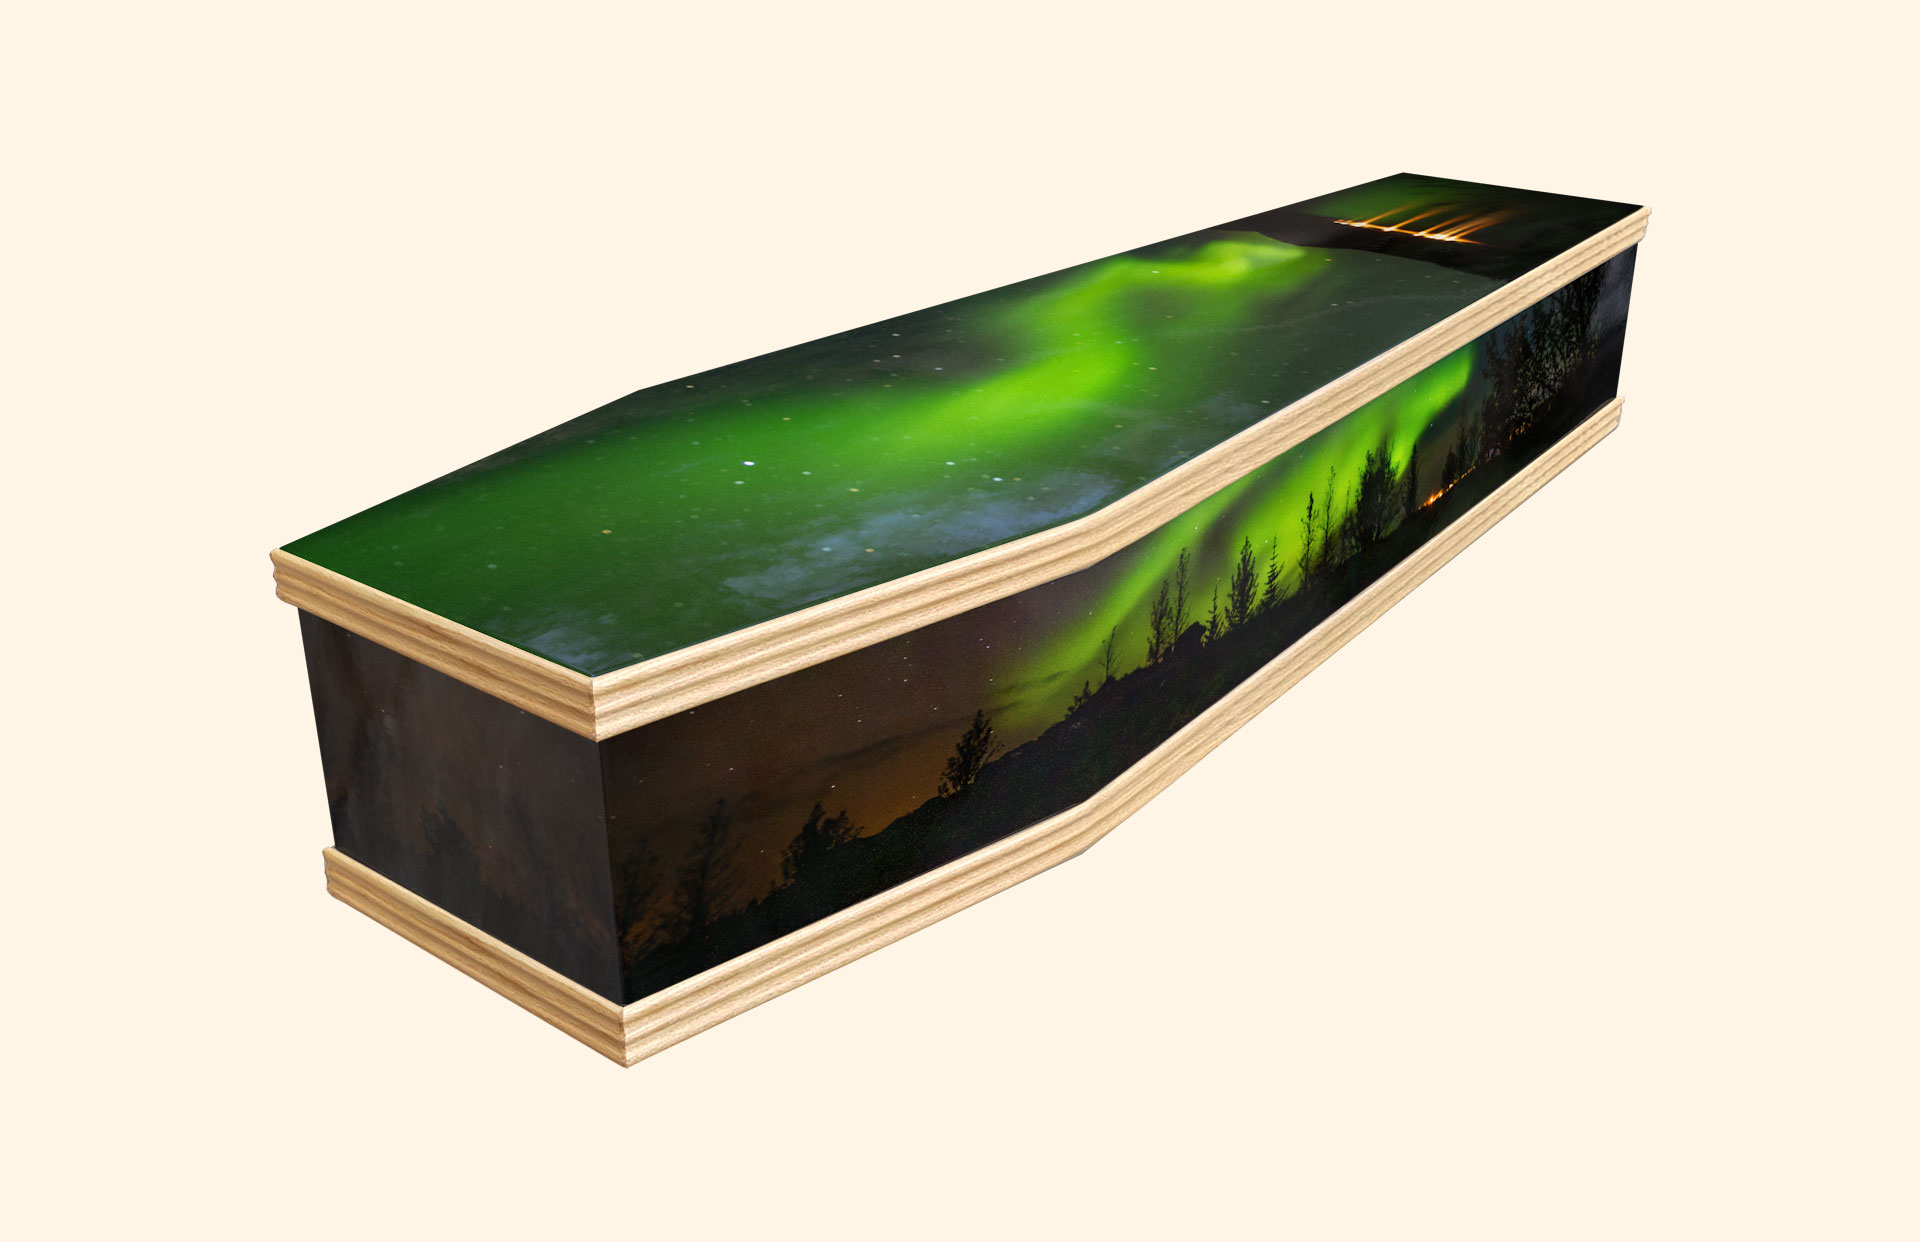 Northern Lights design on a classic coffin